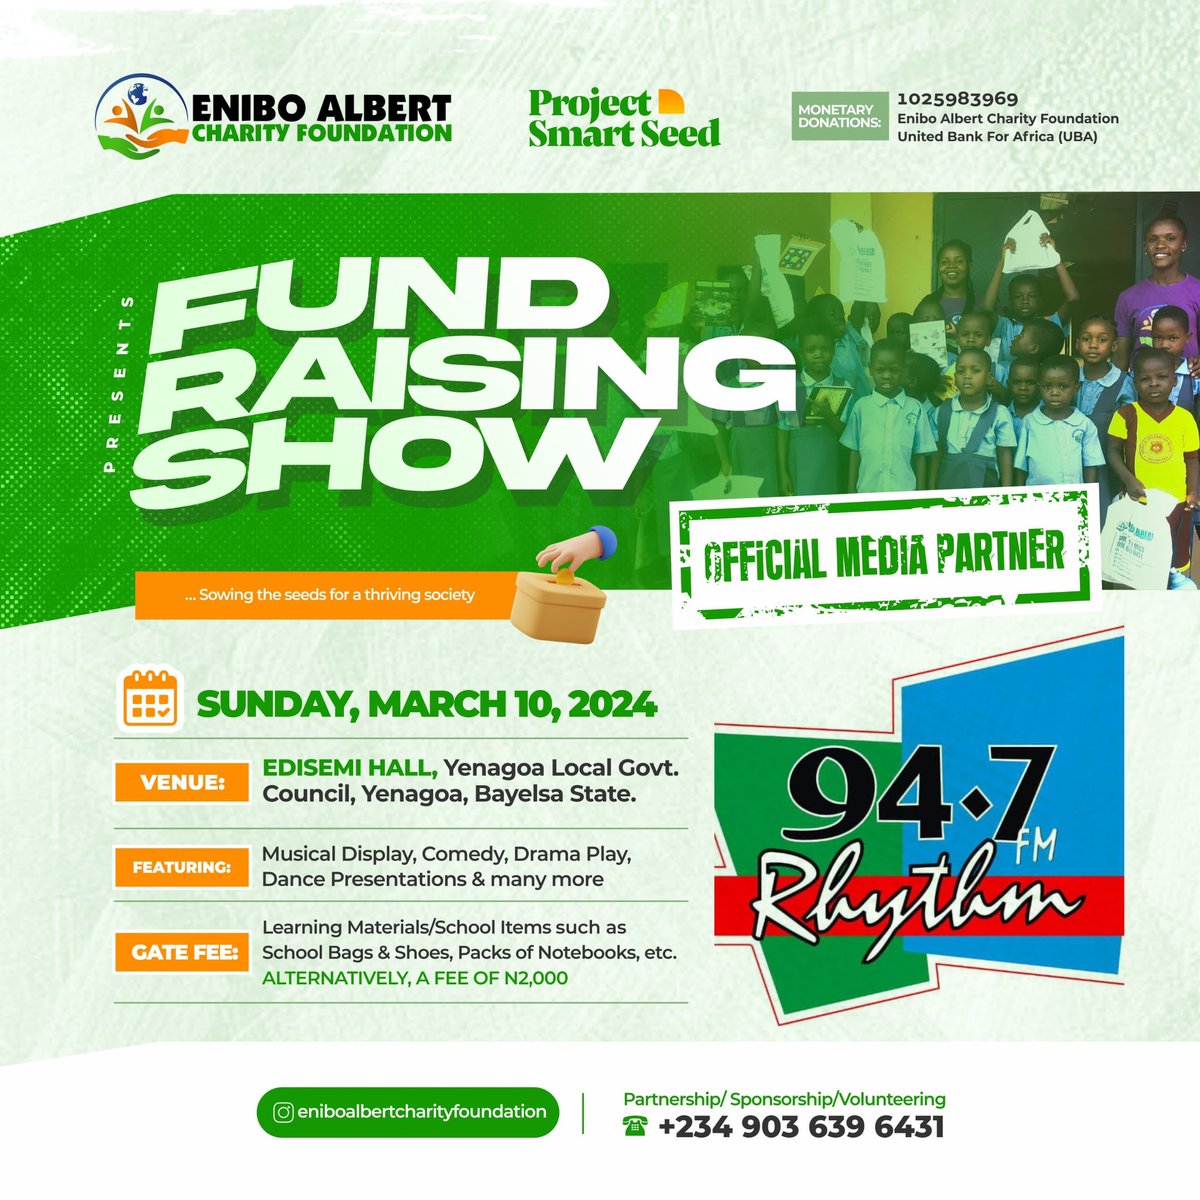 Rhythm FM 94.7 Yenagoa is Proudly partnering with the Enibo Albert Charity Foundation to amplify the reach of Project Smart Seed Fund Raising Show. 

Together, we make education accessible for children in our society.
#educationinnigeria #childeducation #thursdaymorning